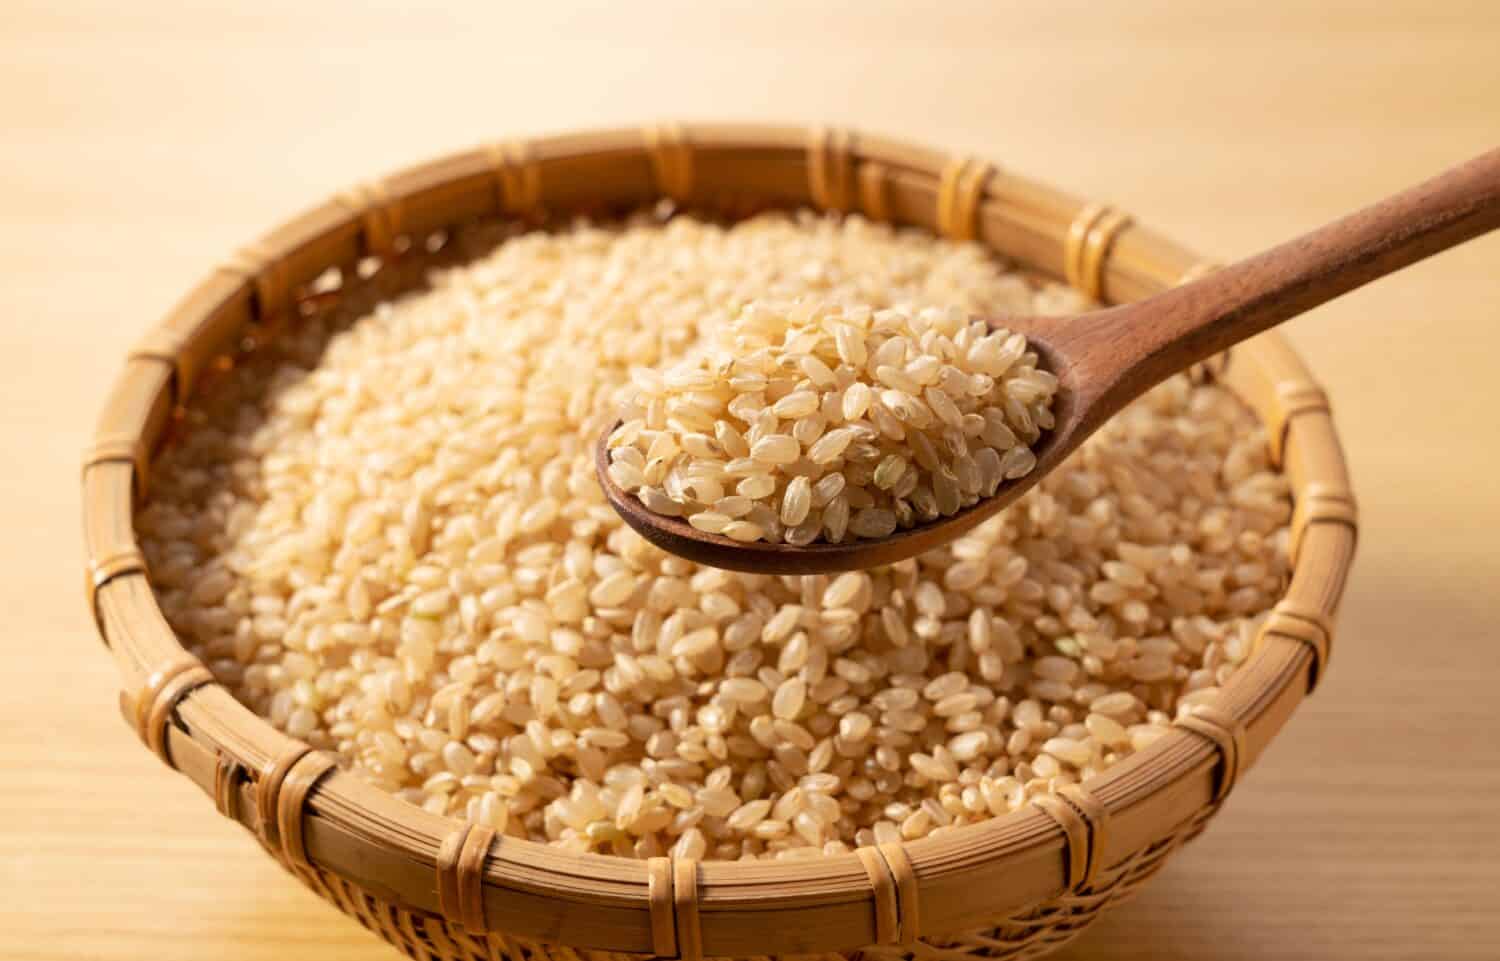 Brown rice in a bamboo colander and a wooden spoon on a wooden background. A pile of brown rice.